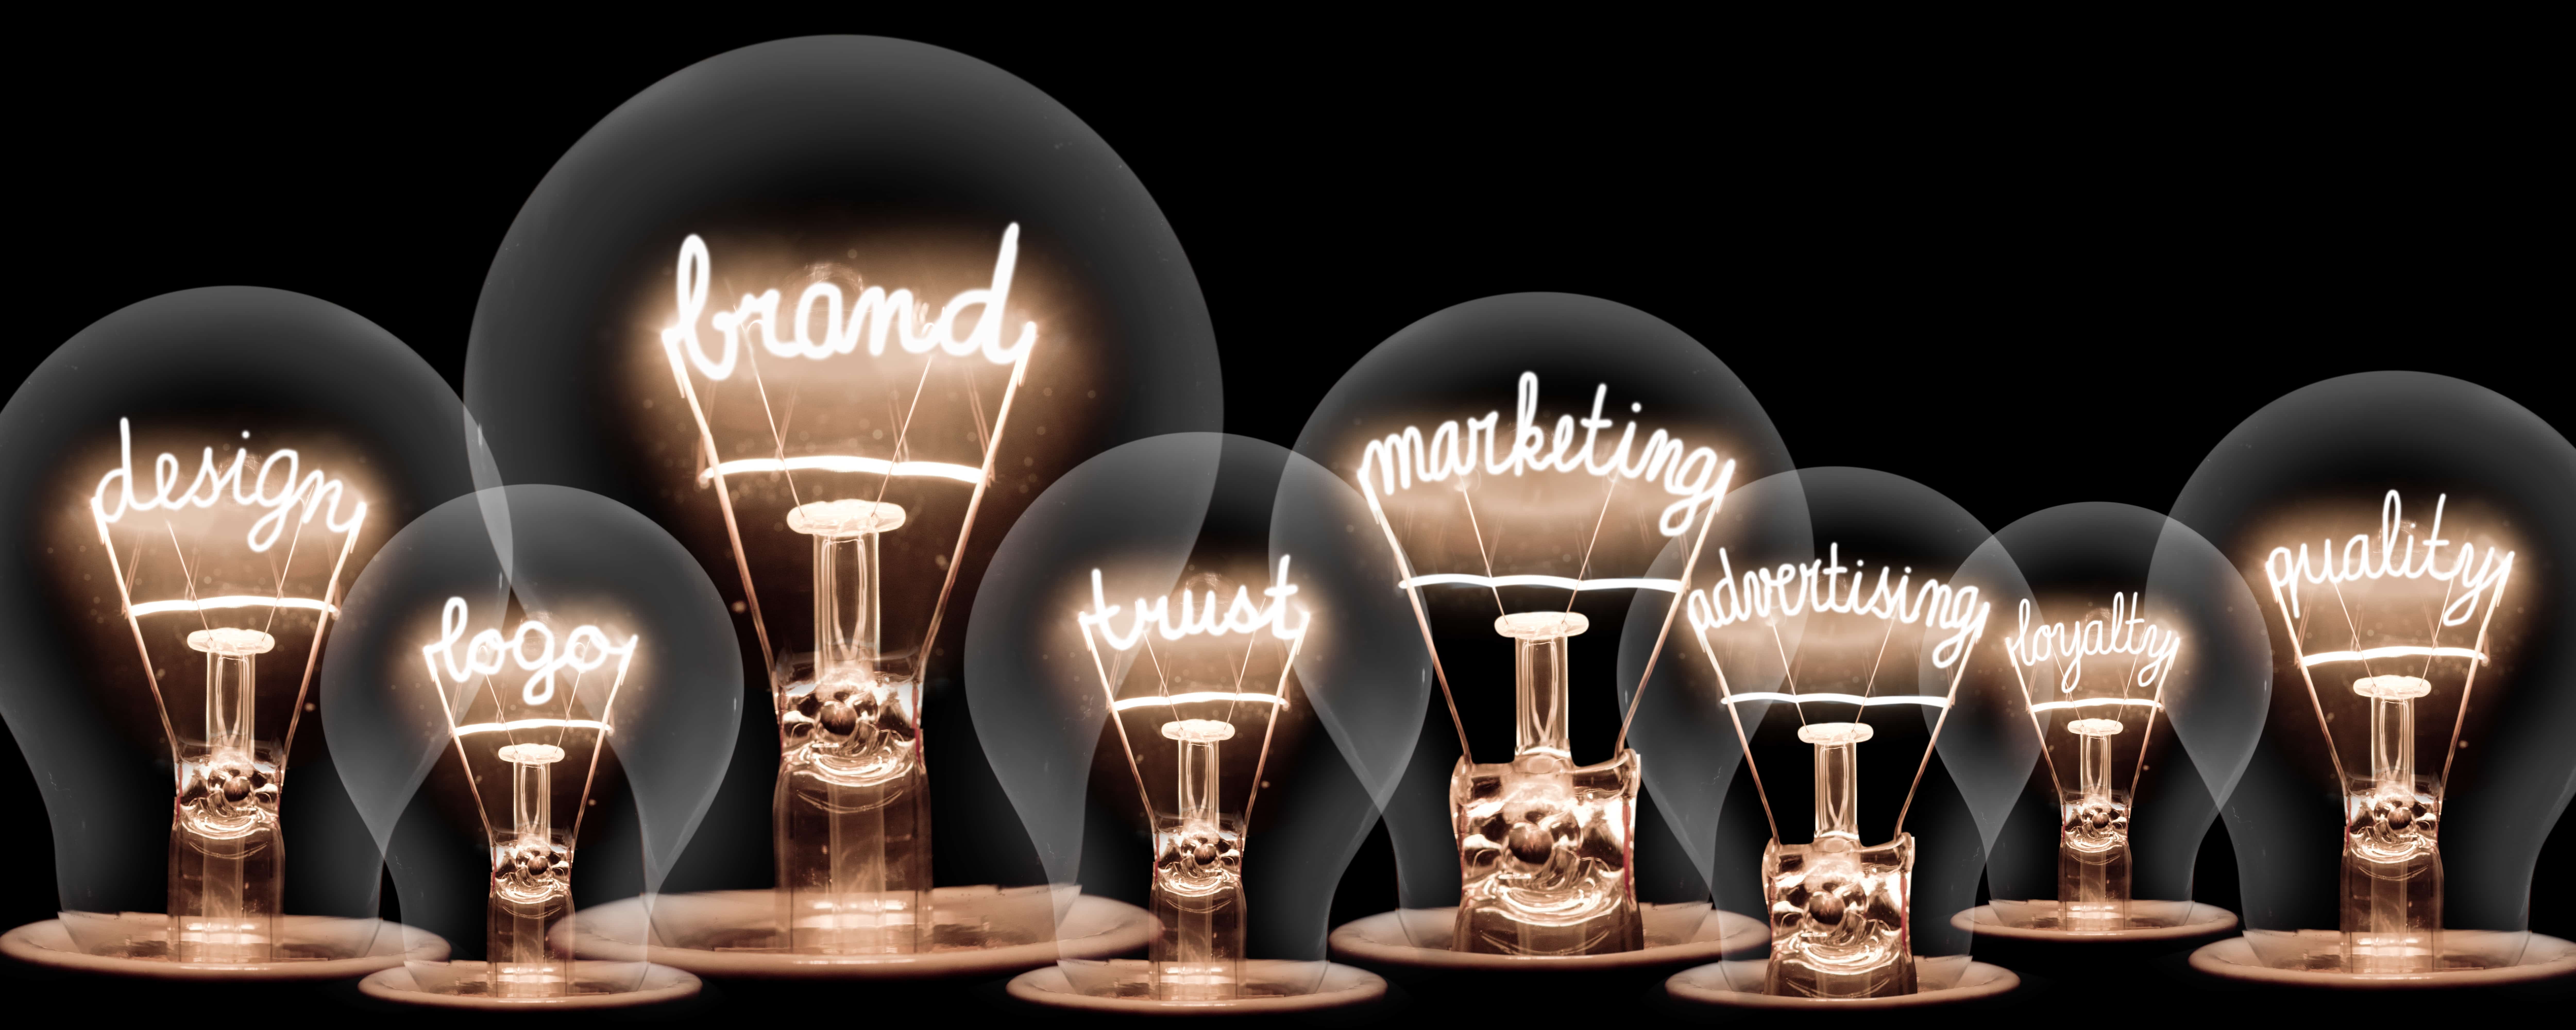 Lightbulbs with various marketing terms in them